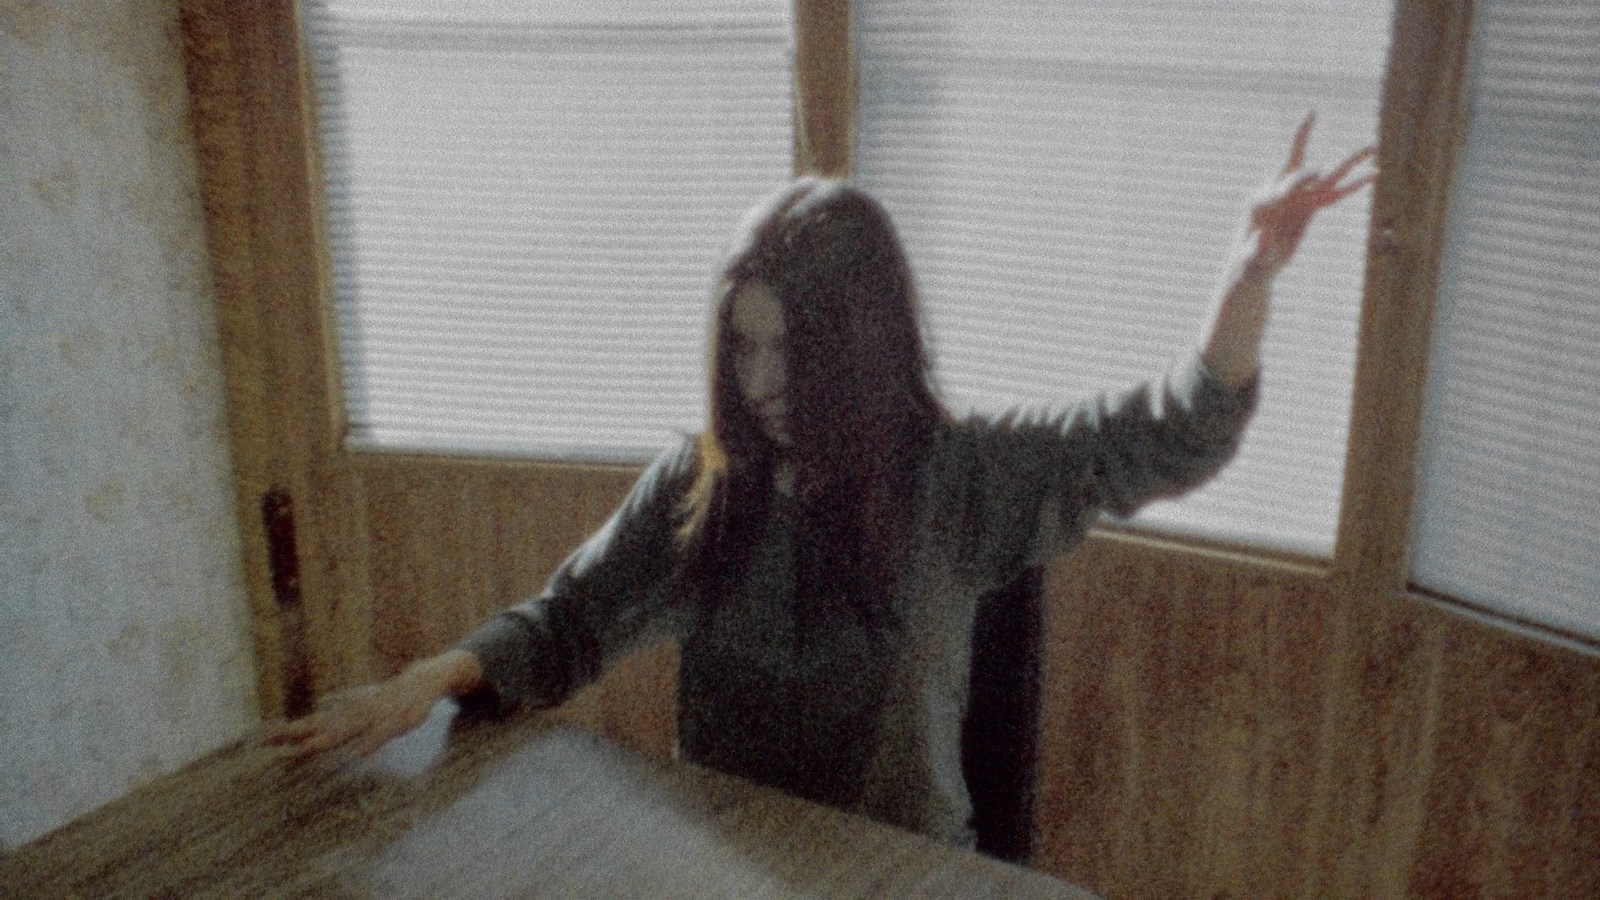 A woman with long hair sits at a table and raises one hand in the air and the other hovers above the table spread out, her fingers making strange signals